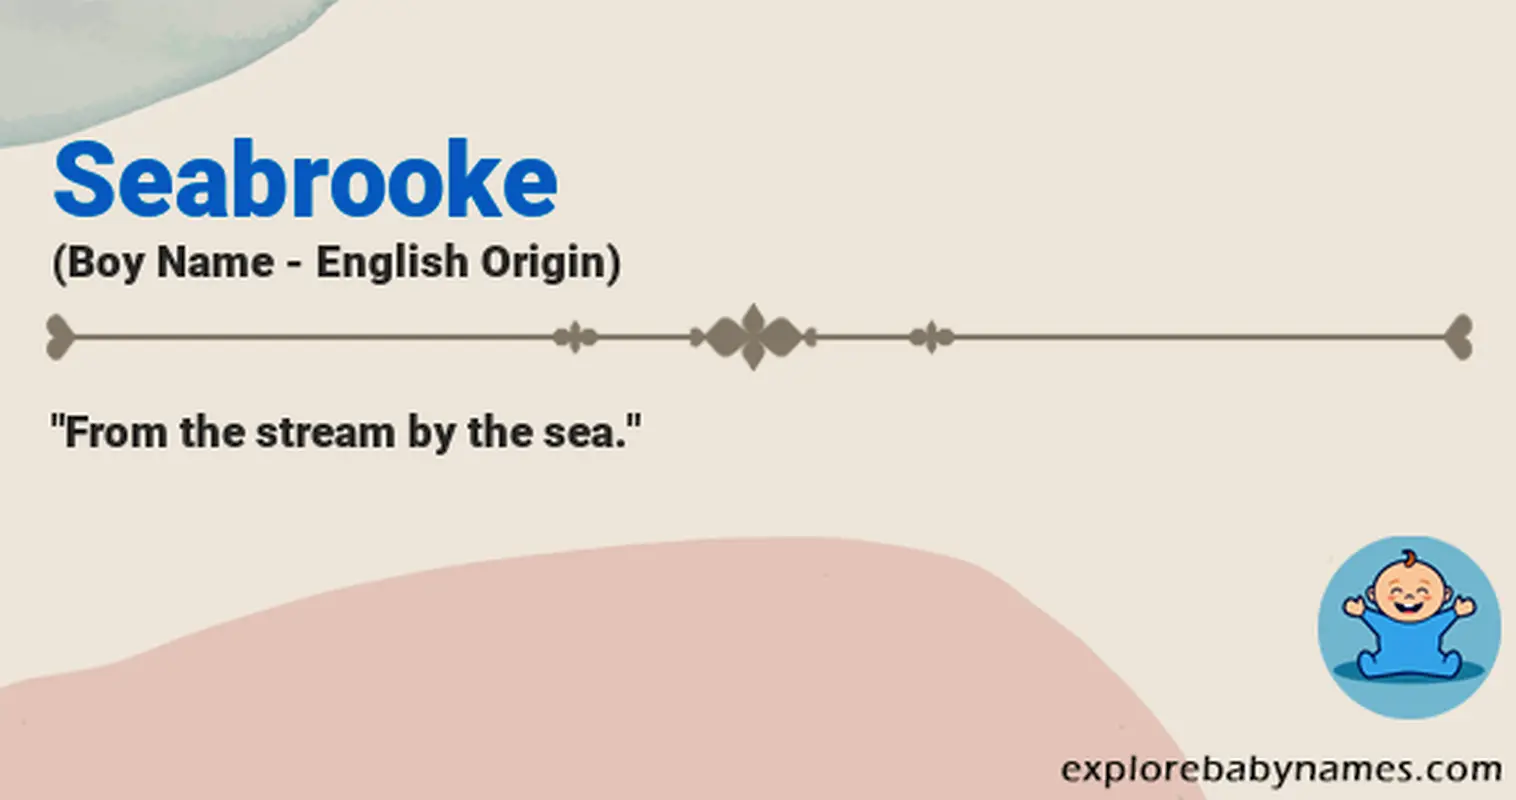 Meaning of Seabrooke